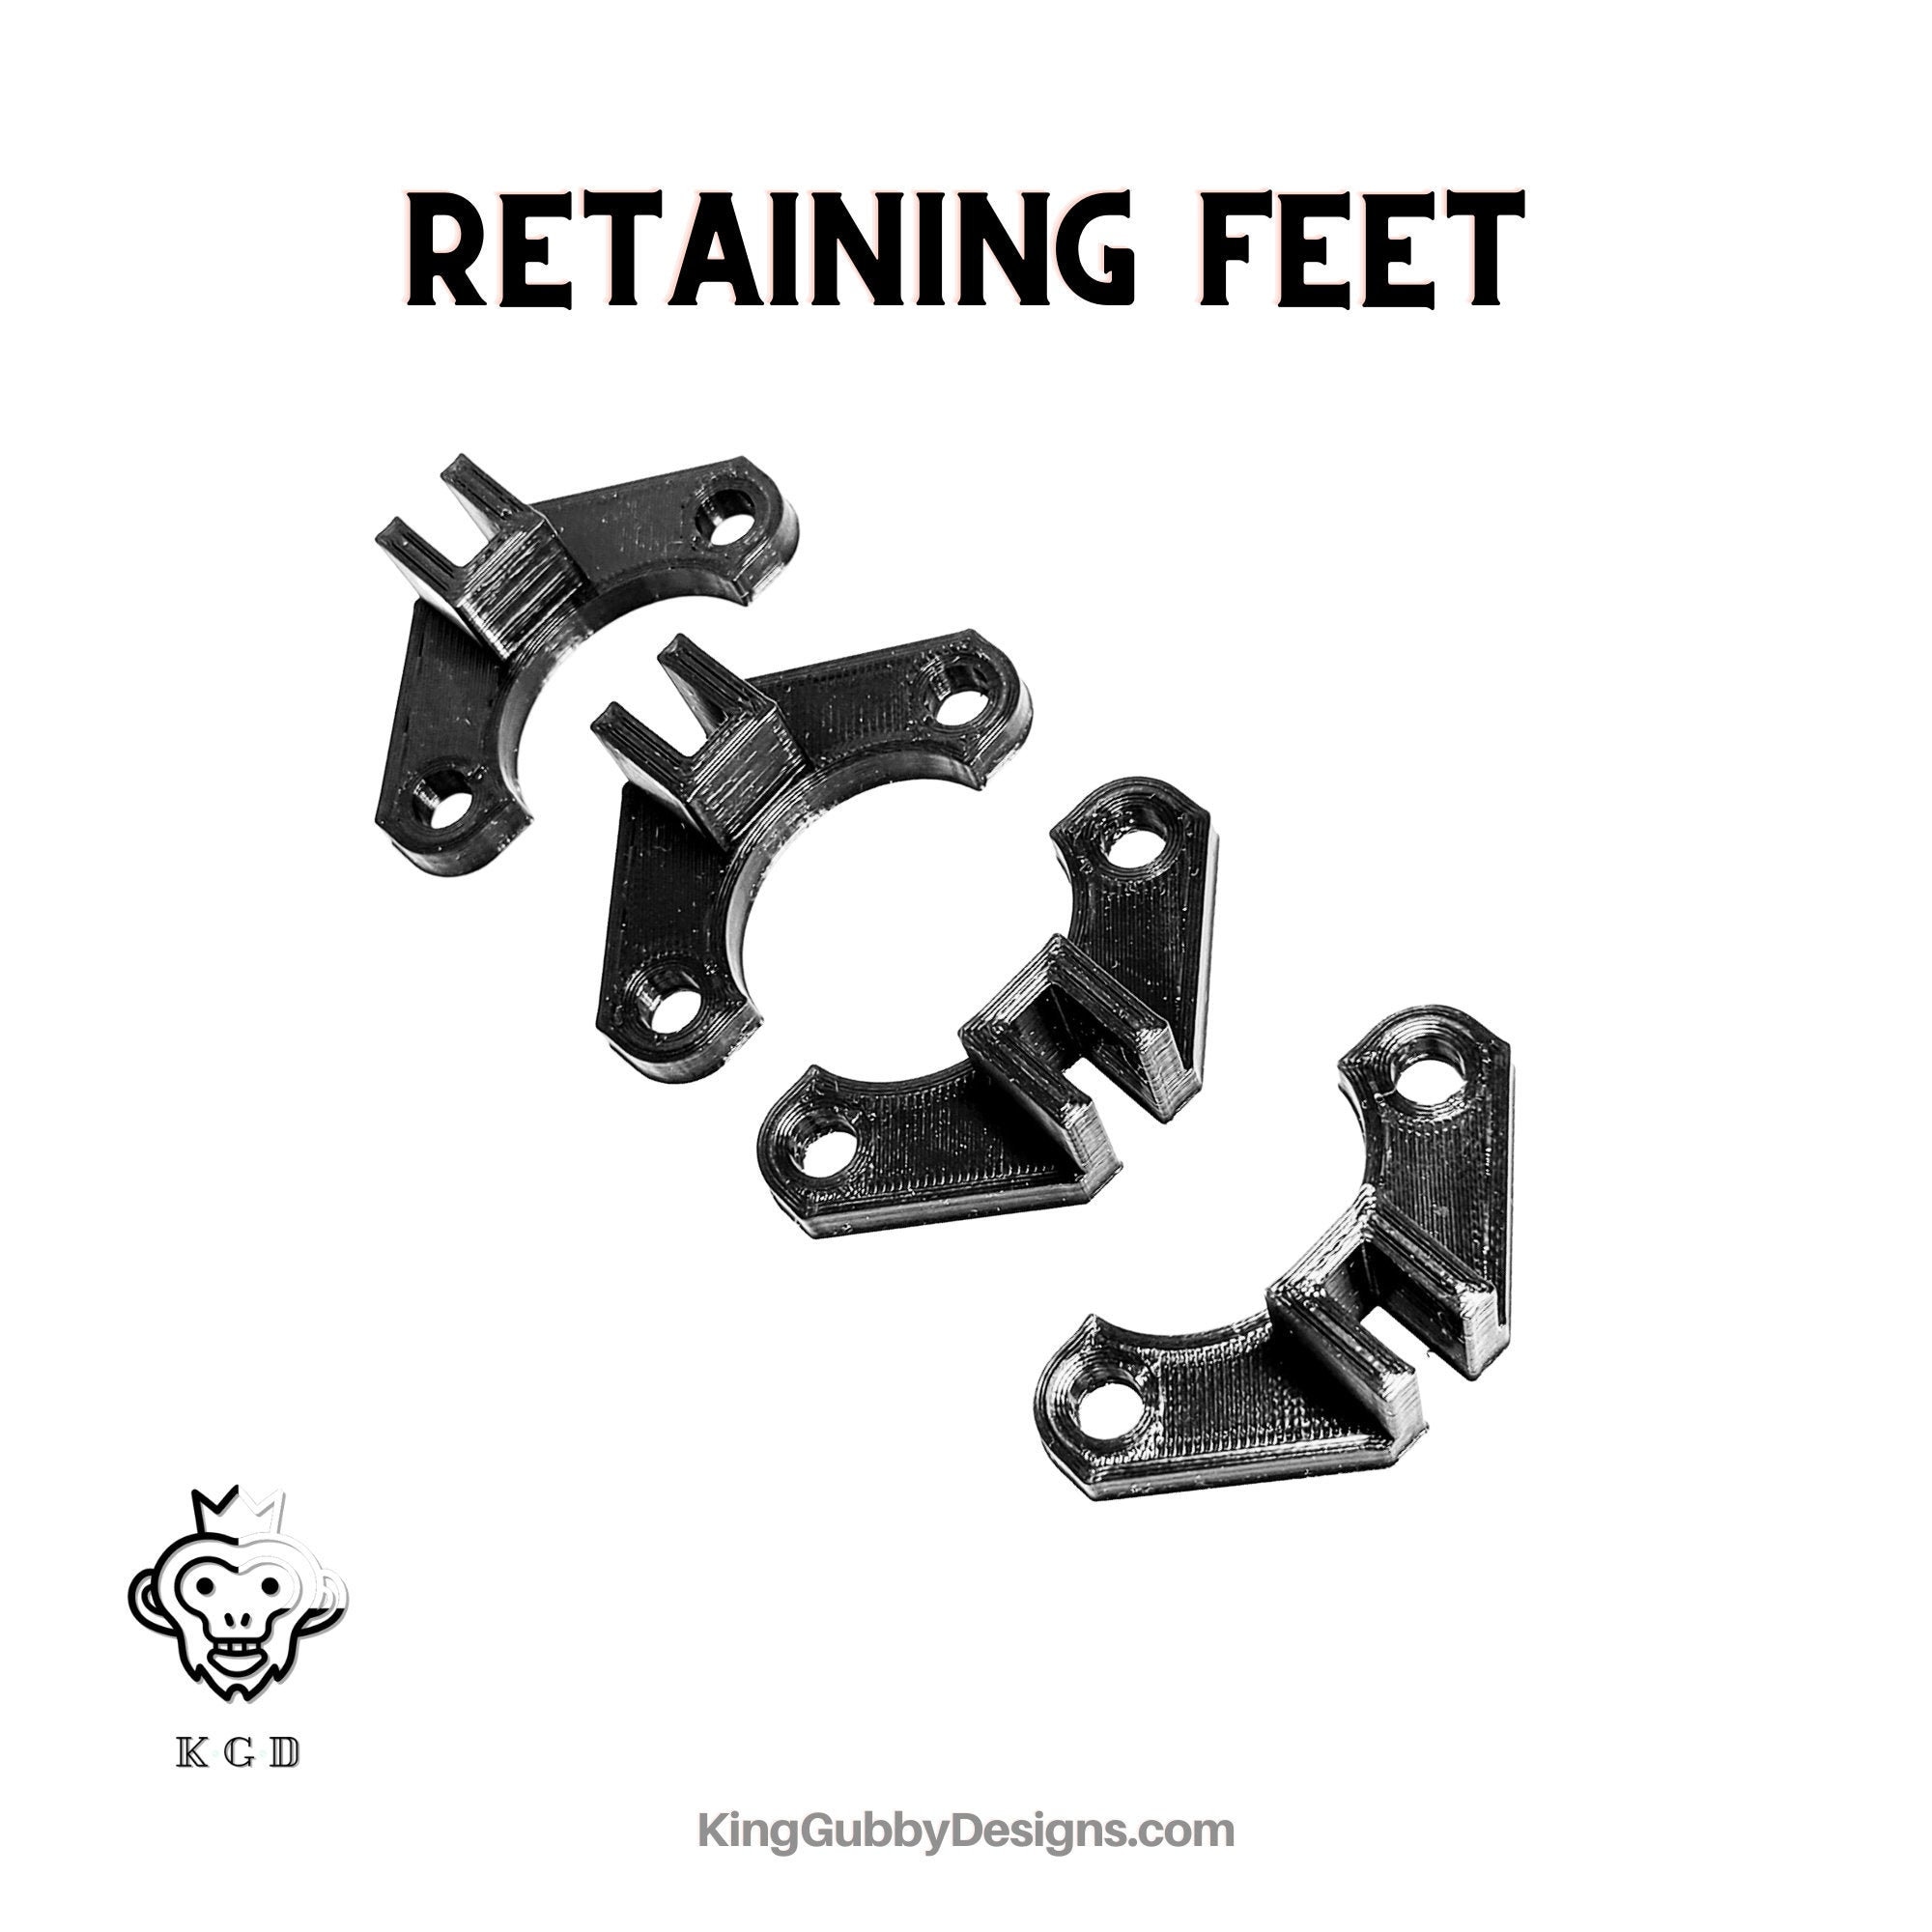 Claw Feet Set of 4 Dig In Retaining Feet for Ortur Laser Master 2 